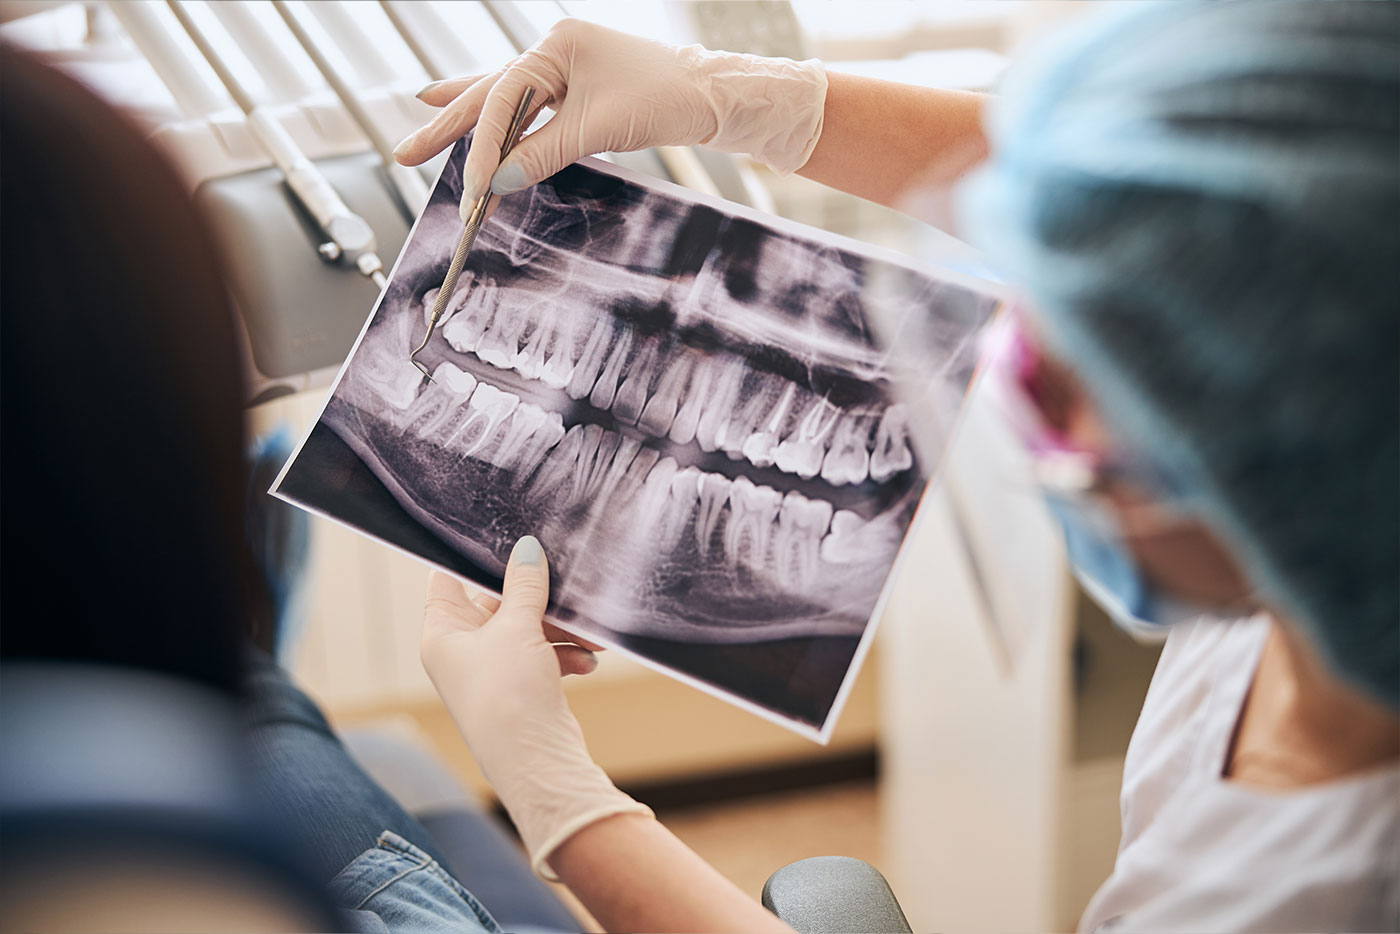 Are Dentist X-Rays Safe? Understanding What Happens at Your Check-Up